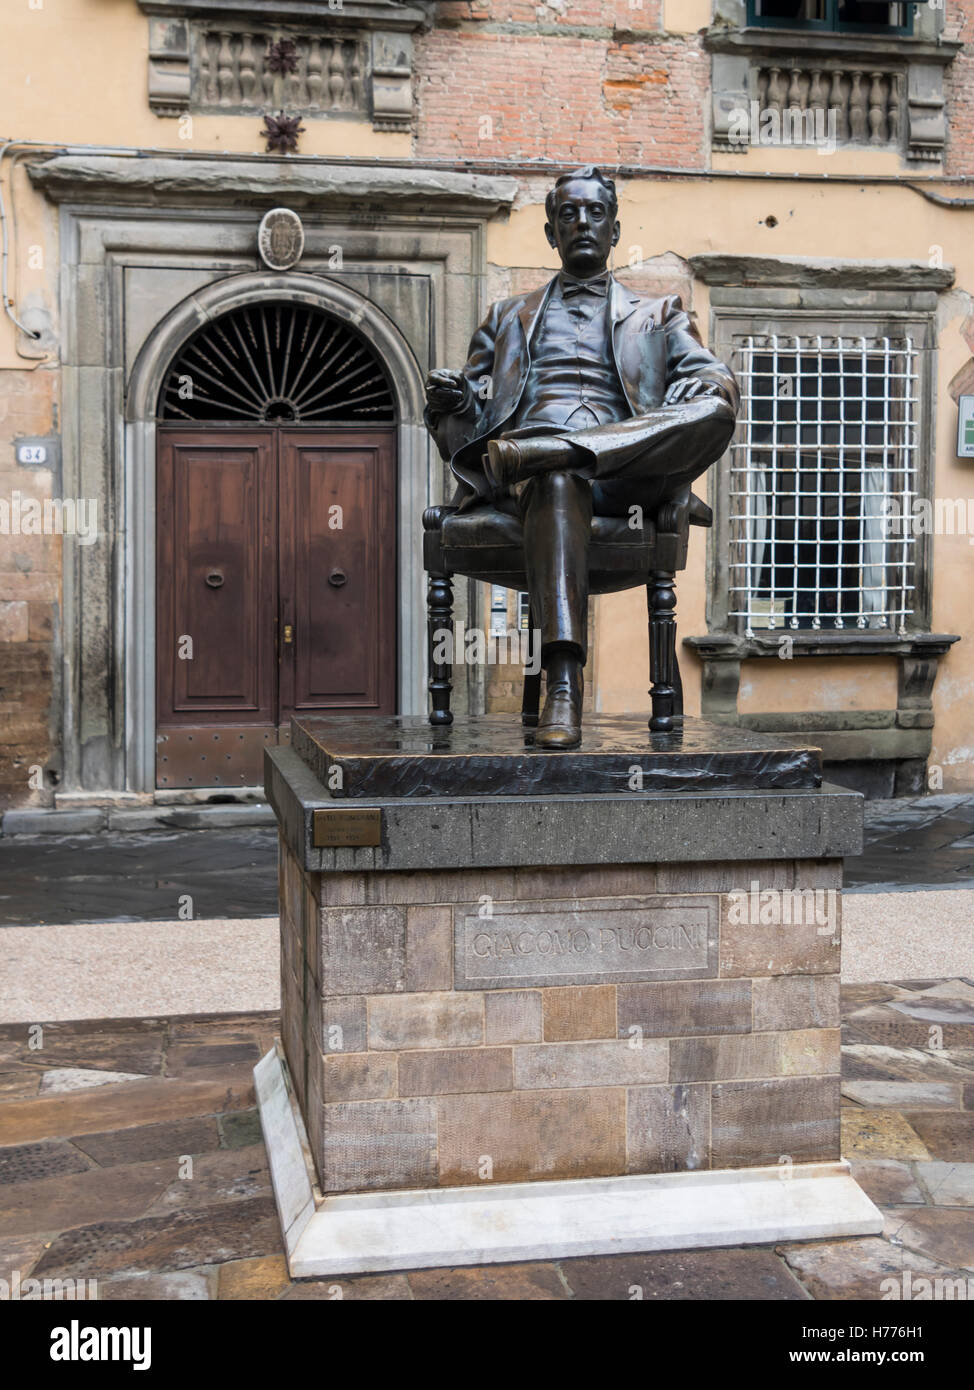 Statue of Italian composer Giacomo Puccini in his hometown of Lucca, Tuscany/Toscana, Italy. Sculpture by Vito Tongiani in 1994. Stock Photo